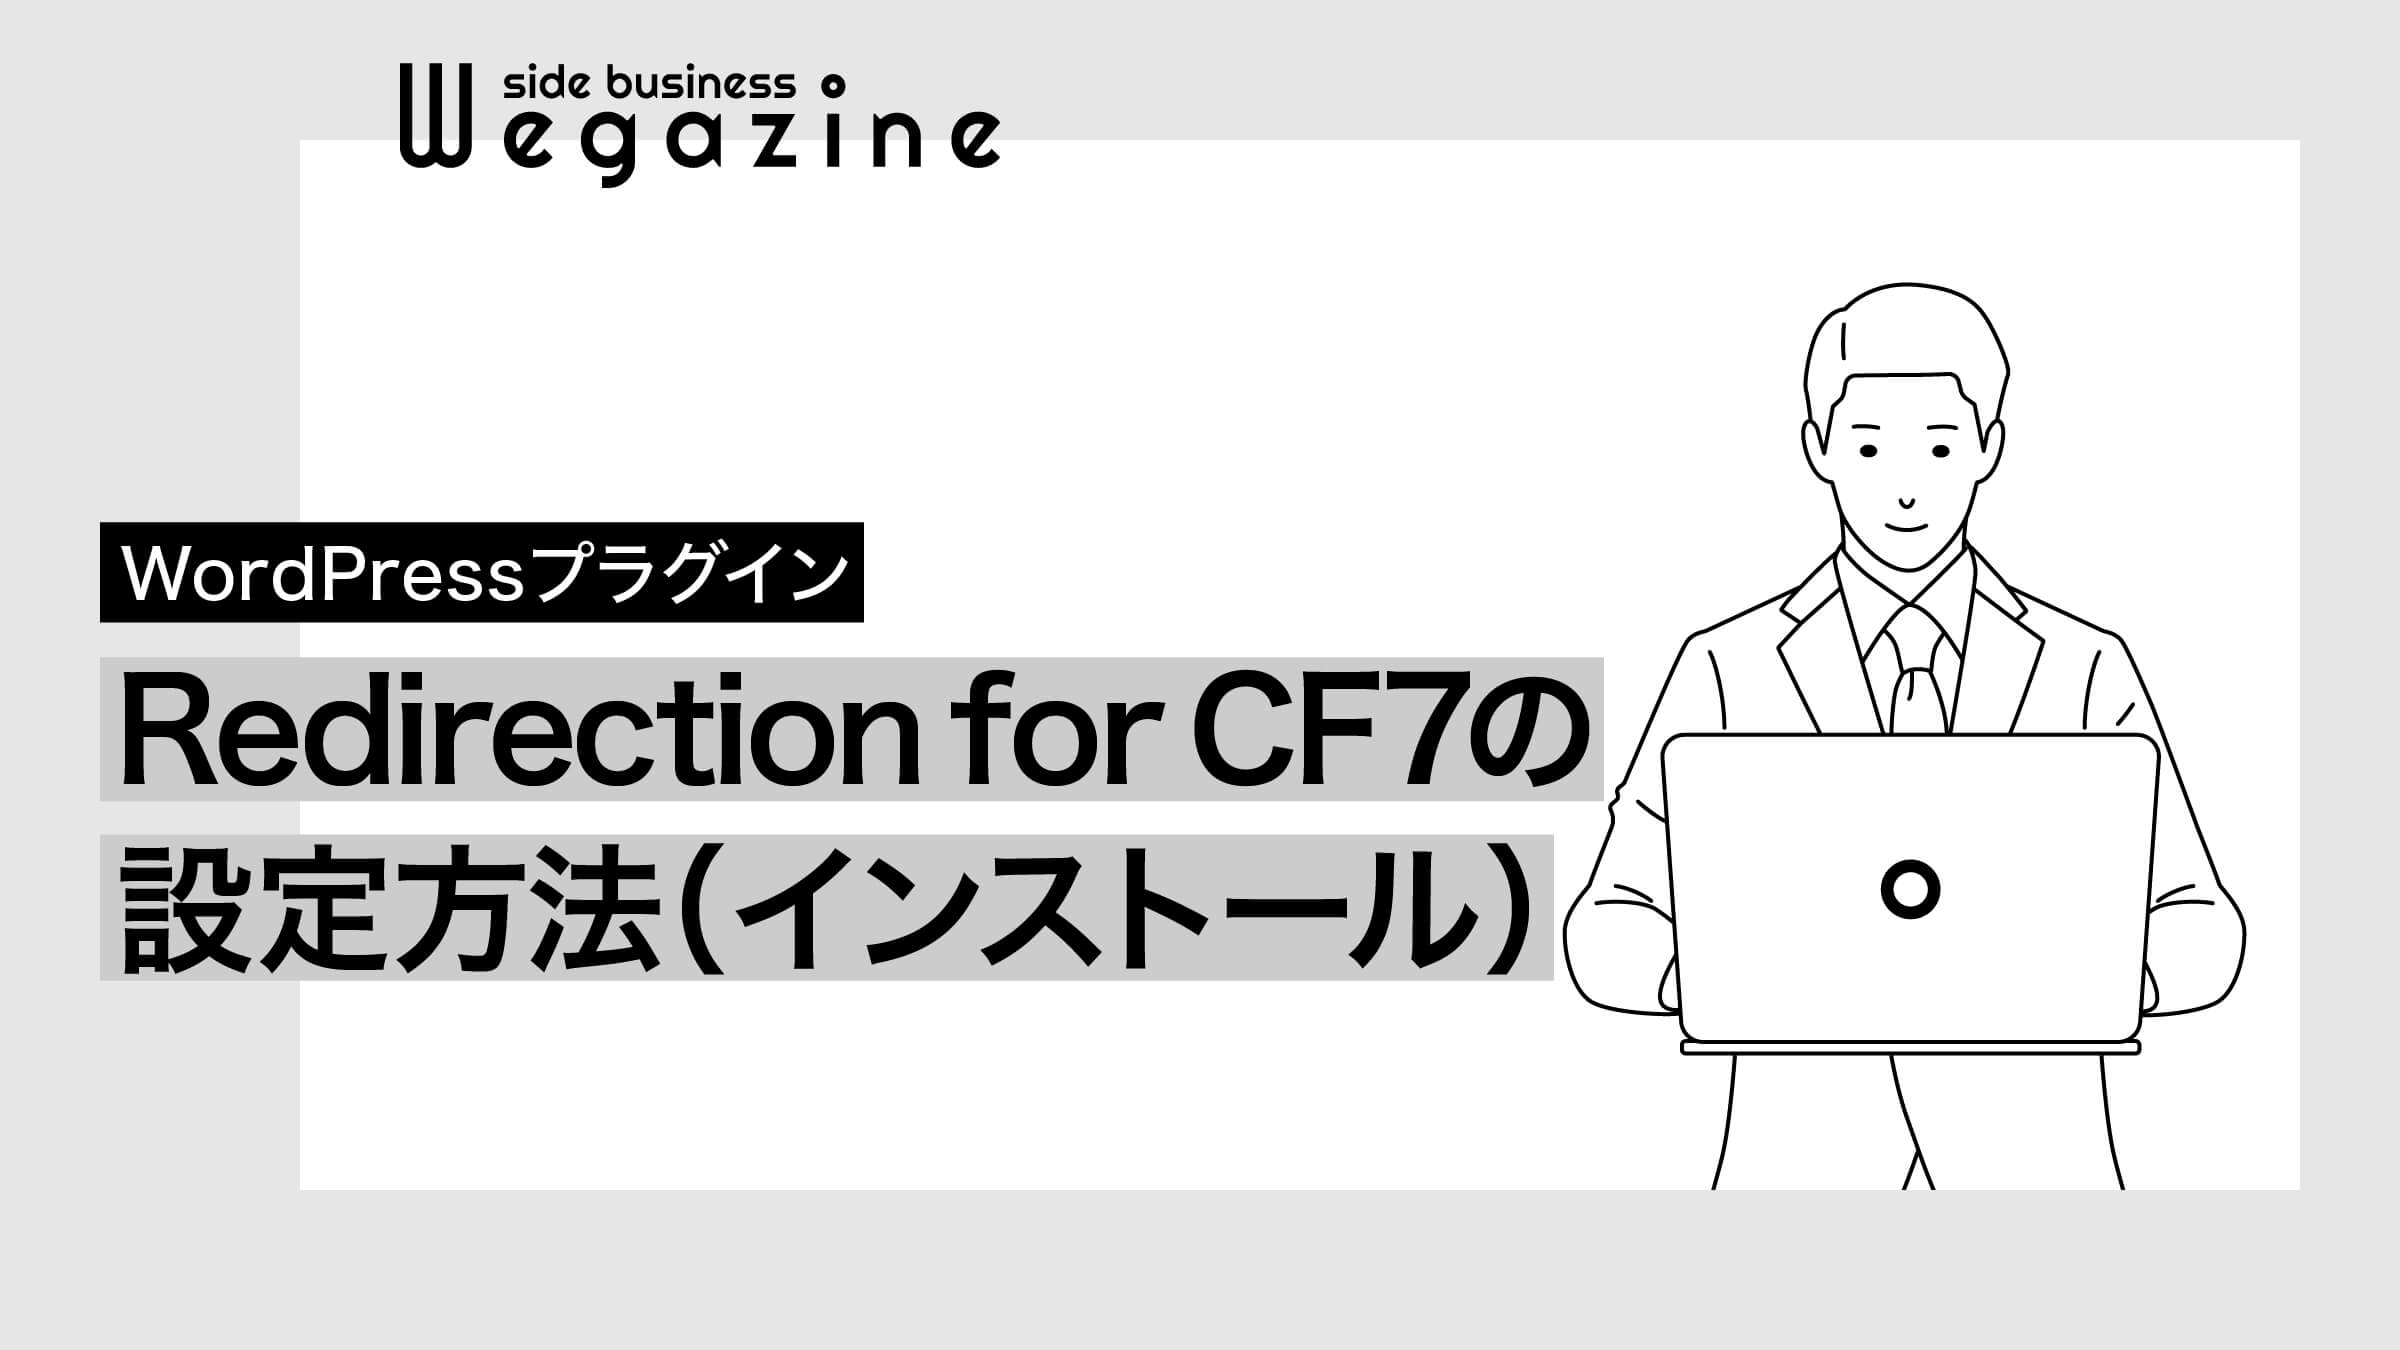 Redirection for Contact Form 7の設定方法（インストール）